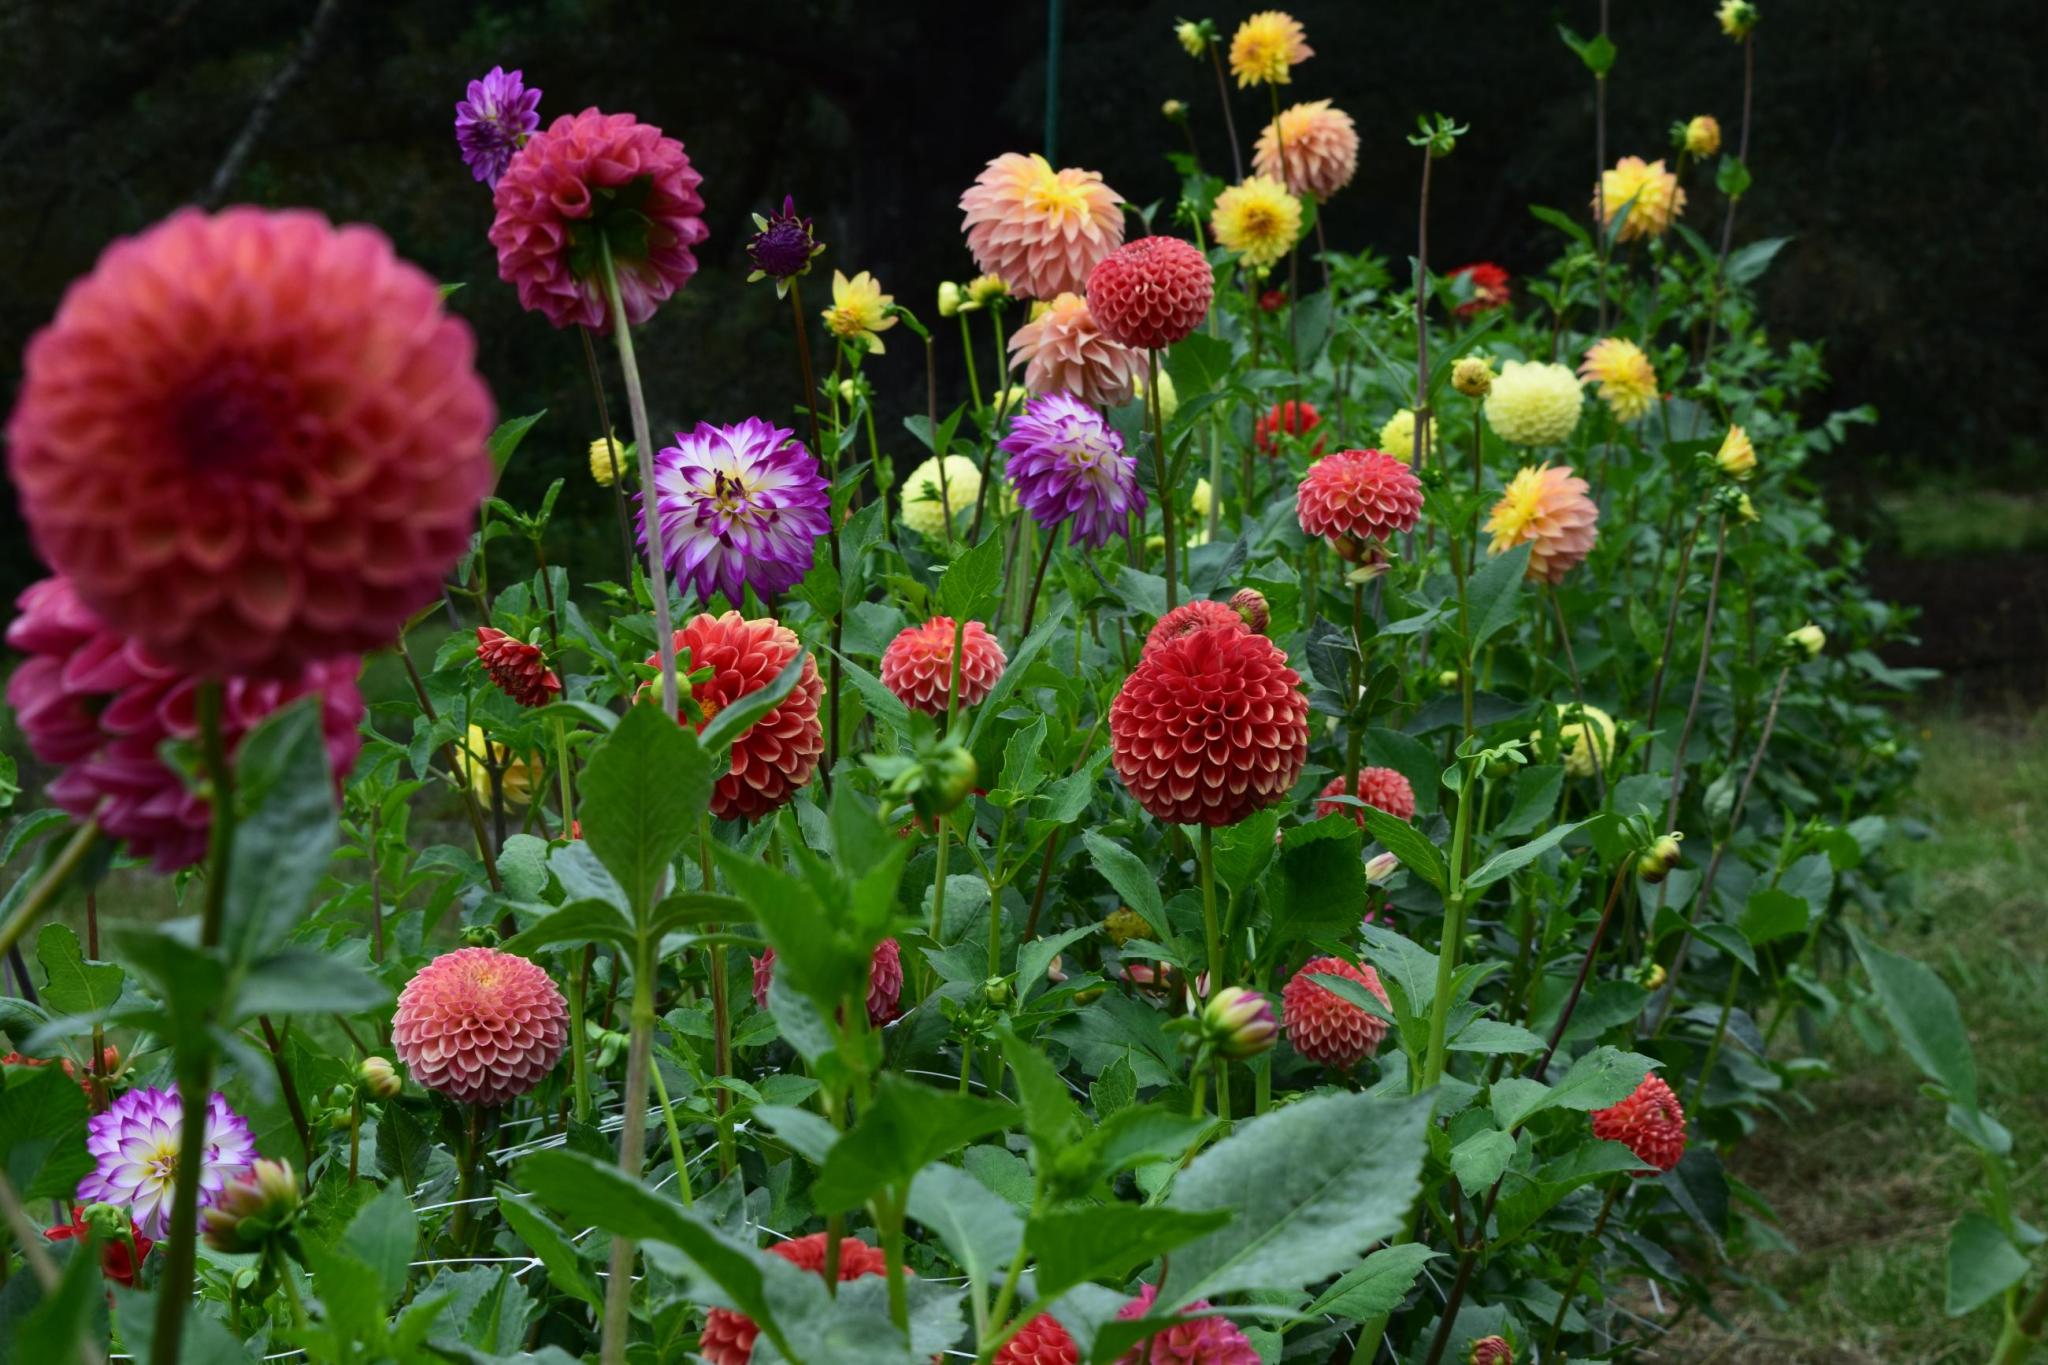 dahlia flowers (pink, purple, and yellow) in a garden